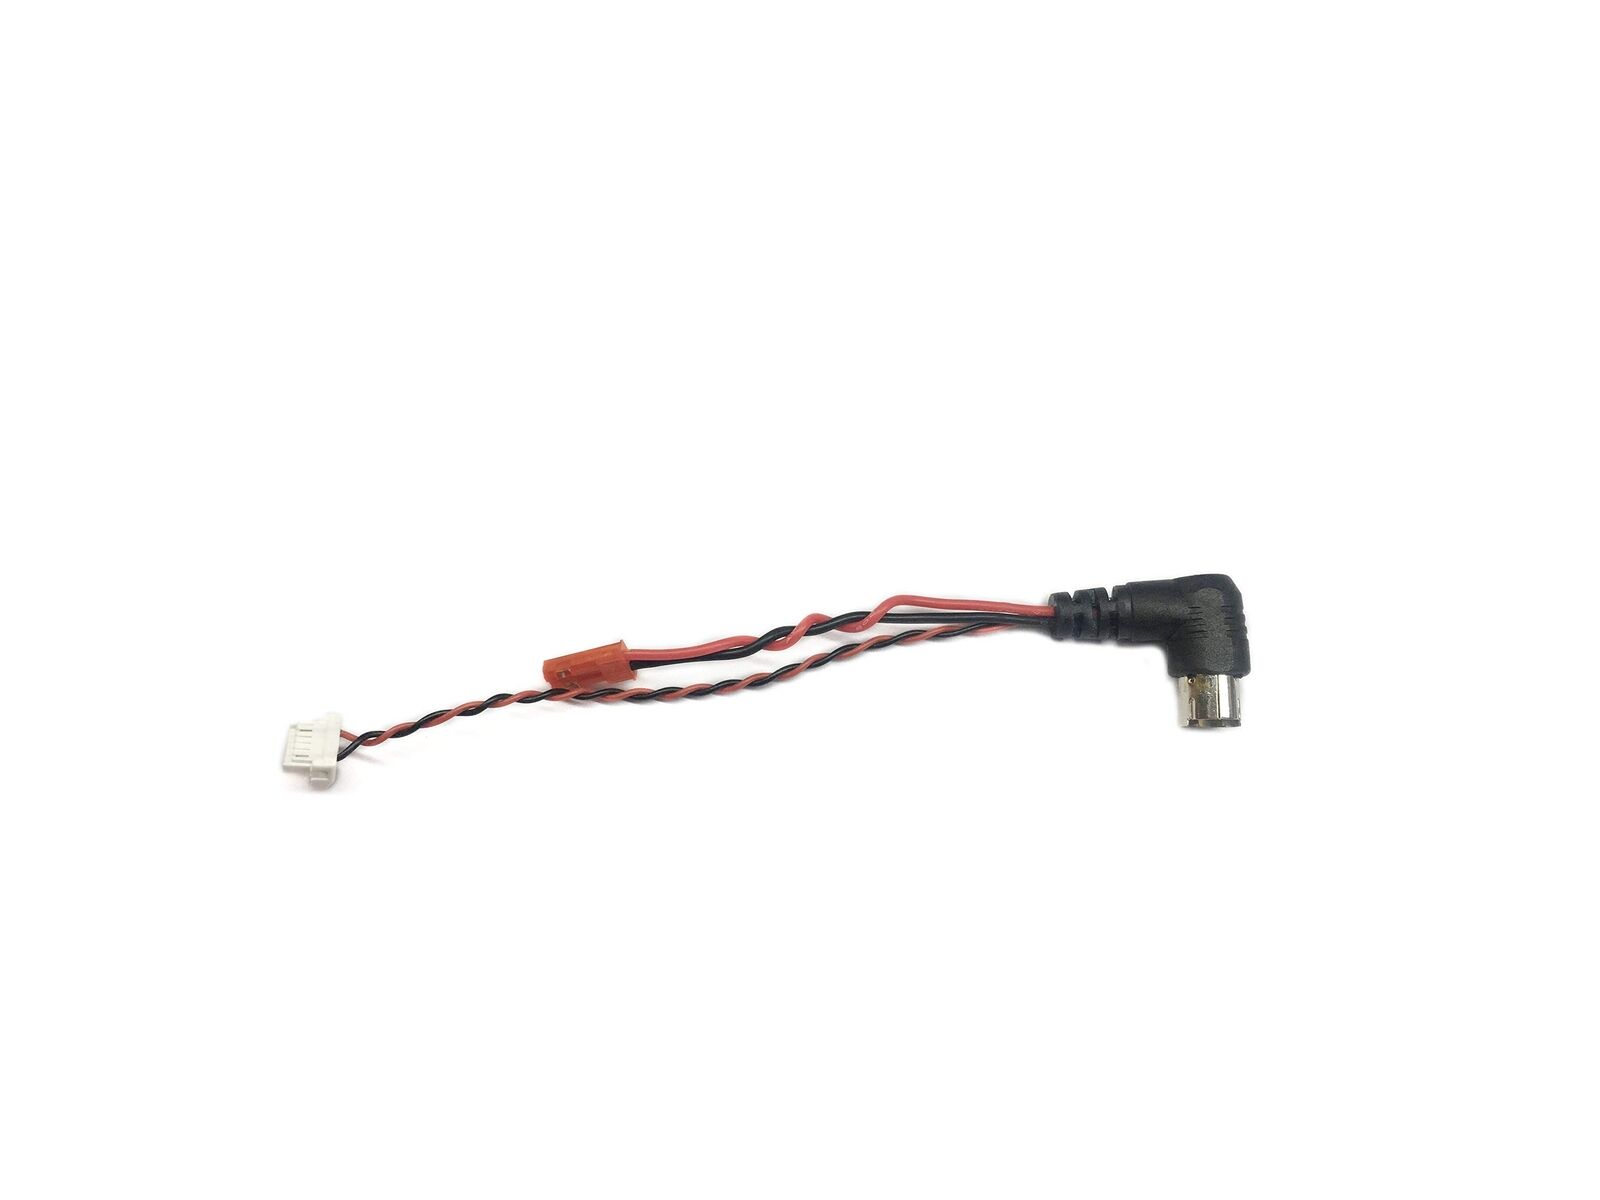 Radiolink TBS Crossfire Connect Cable for Racing Drone Works with AT9S Pro 12...